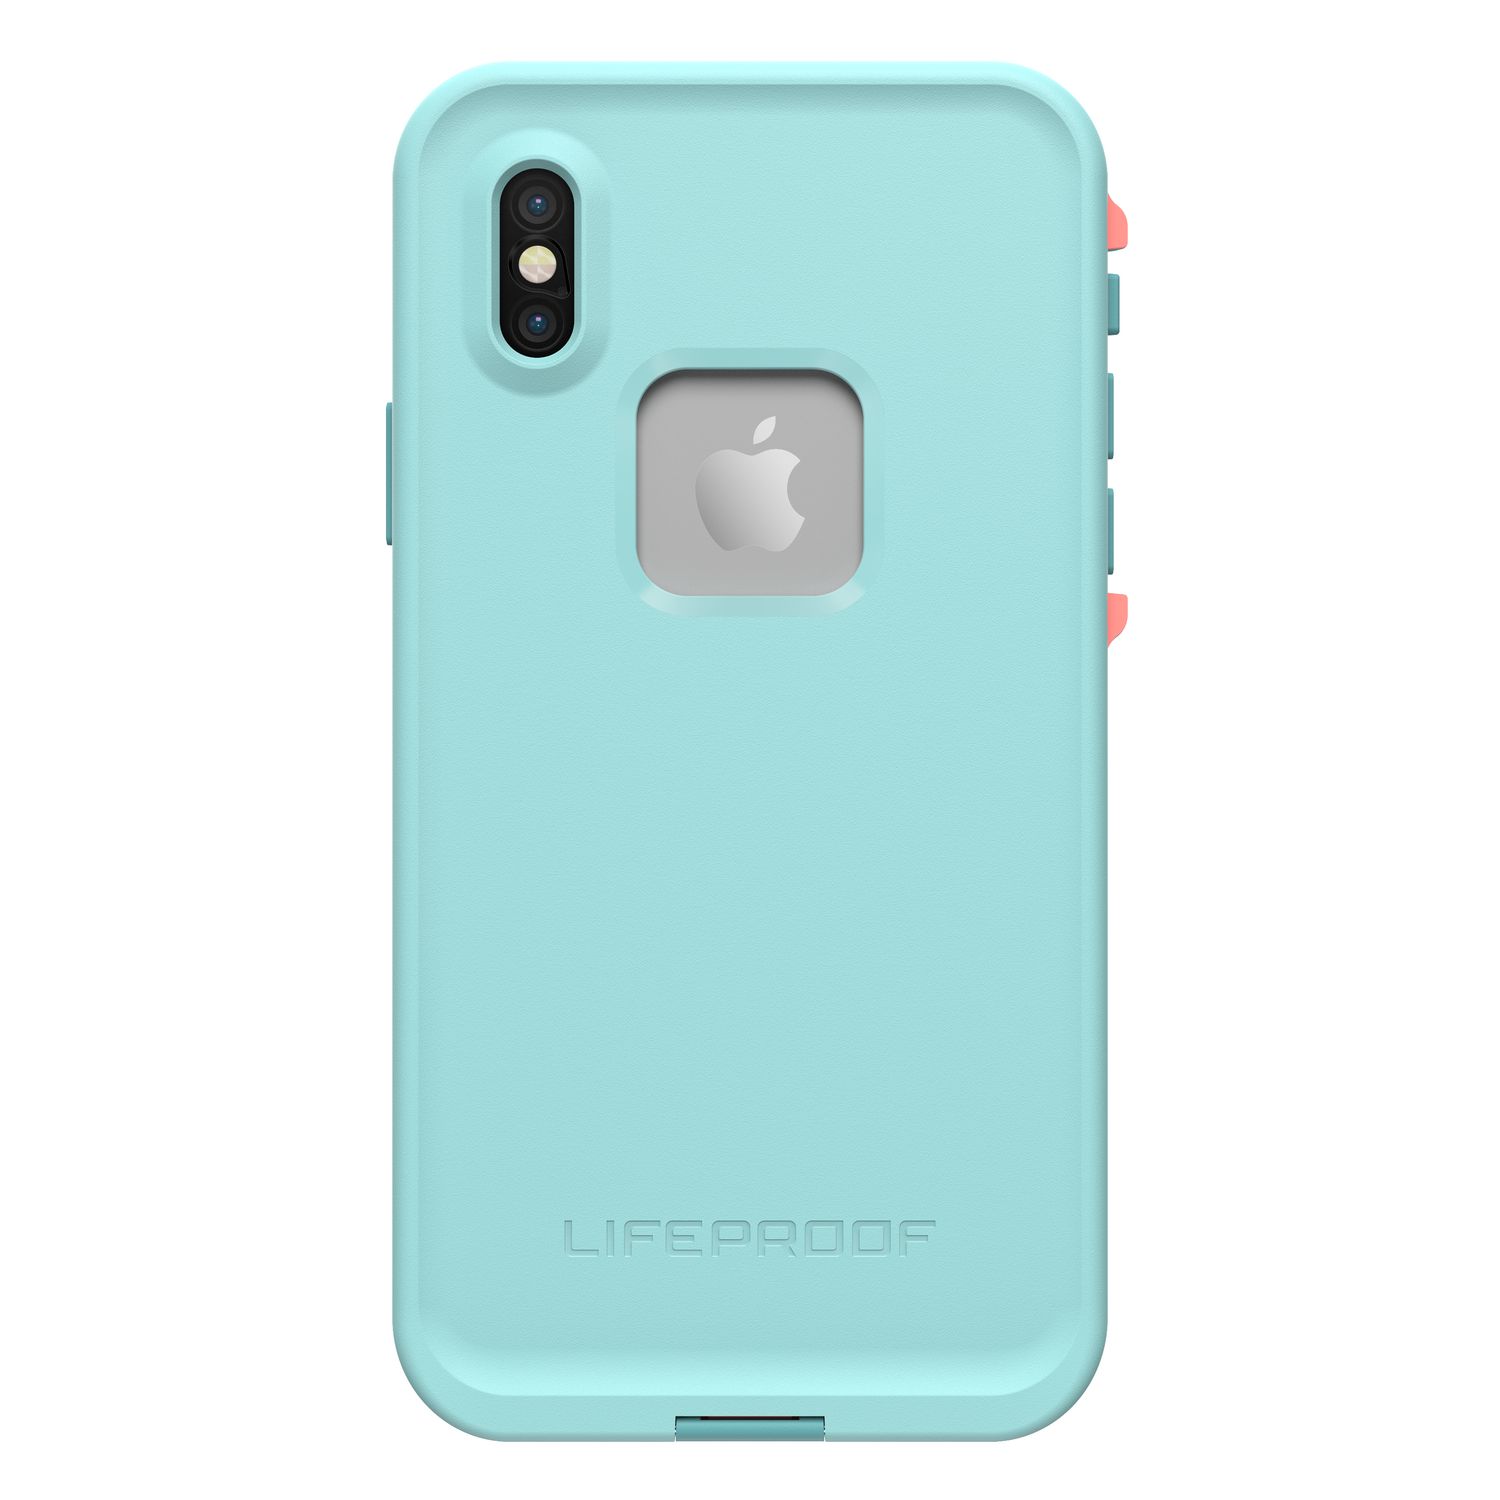 LifeProof Fre Case for iPhone X | Walmart Canada